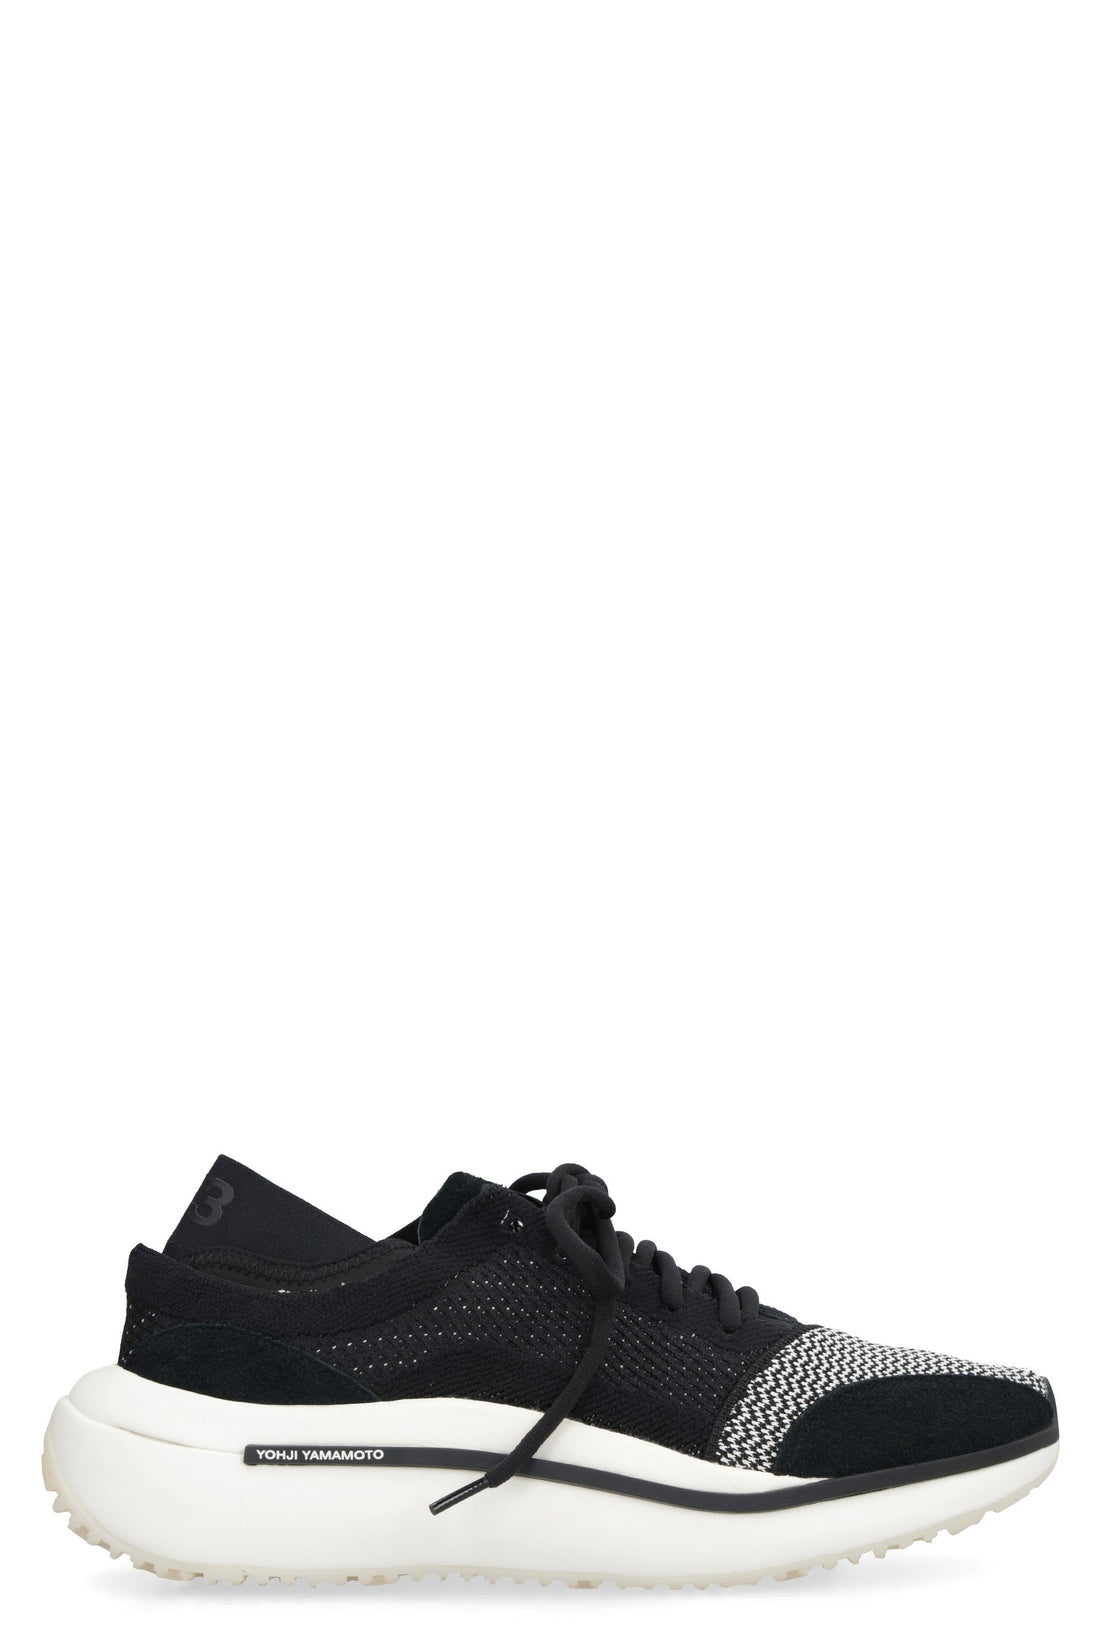 adidas Y-3-OUTLET-SALE-Qisan Knit fabric low-top sneakers-ARCHIVIST